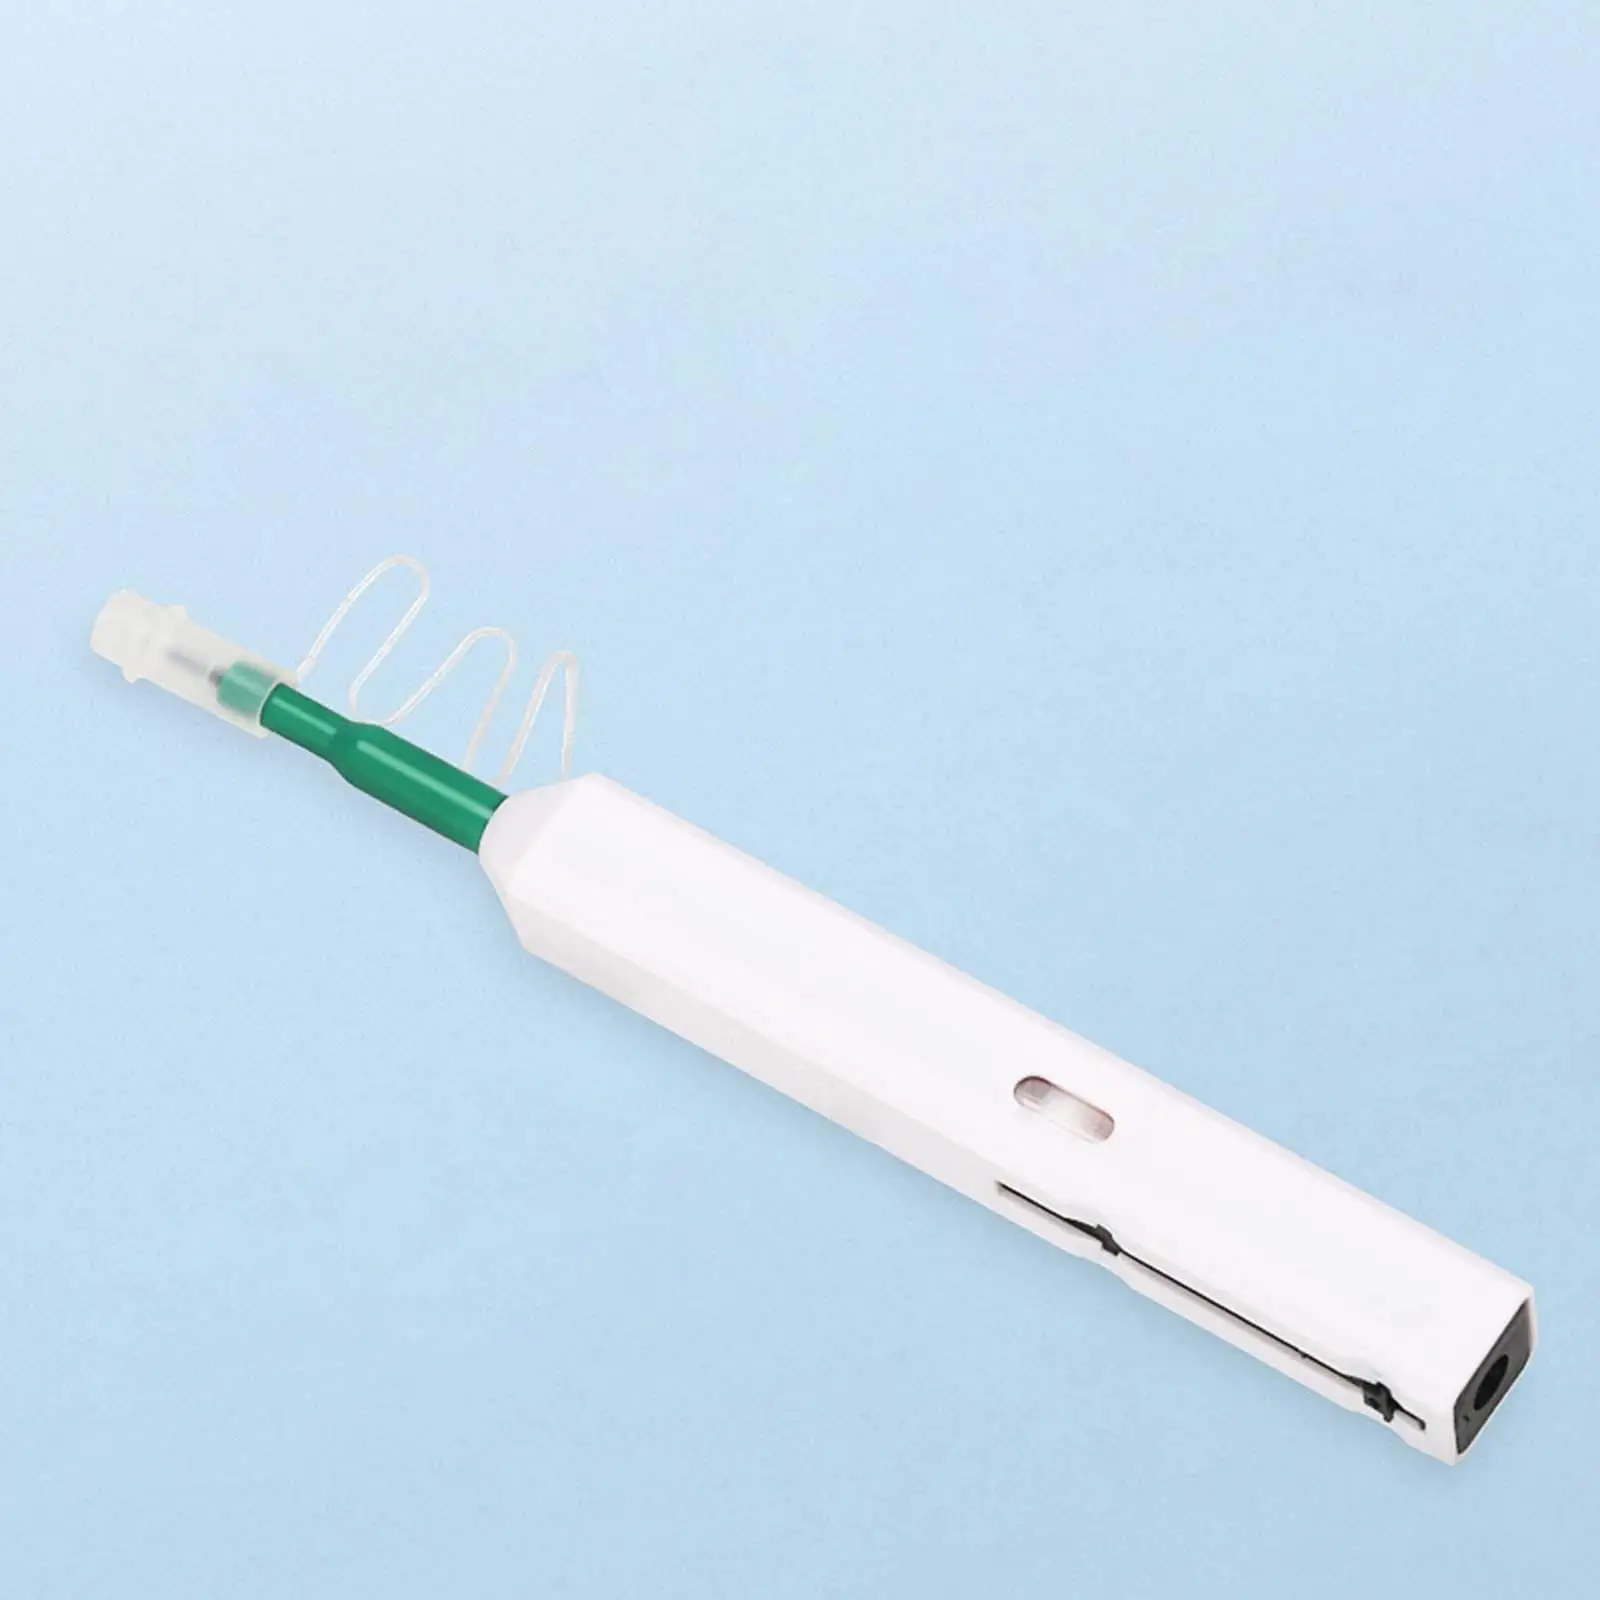 Universal Fiber Optic Cleaner Pen Connector Head Cleaner Lightweight 800 Cleans Pens Tools